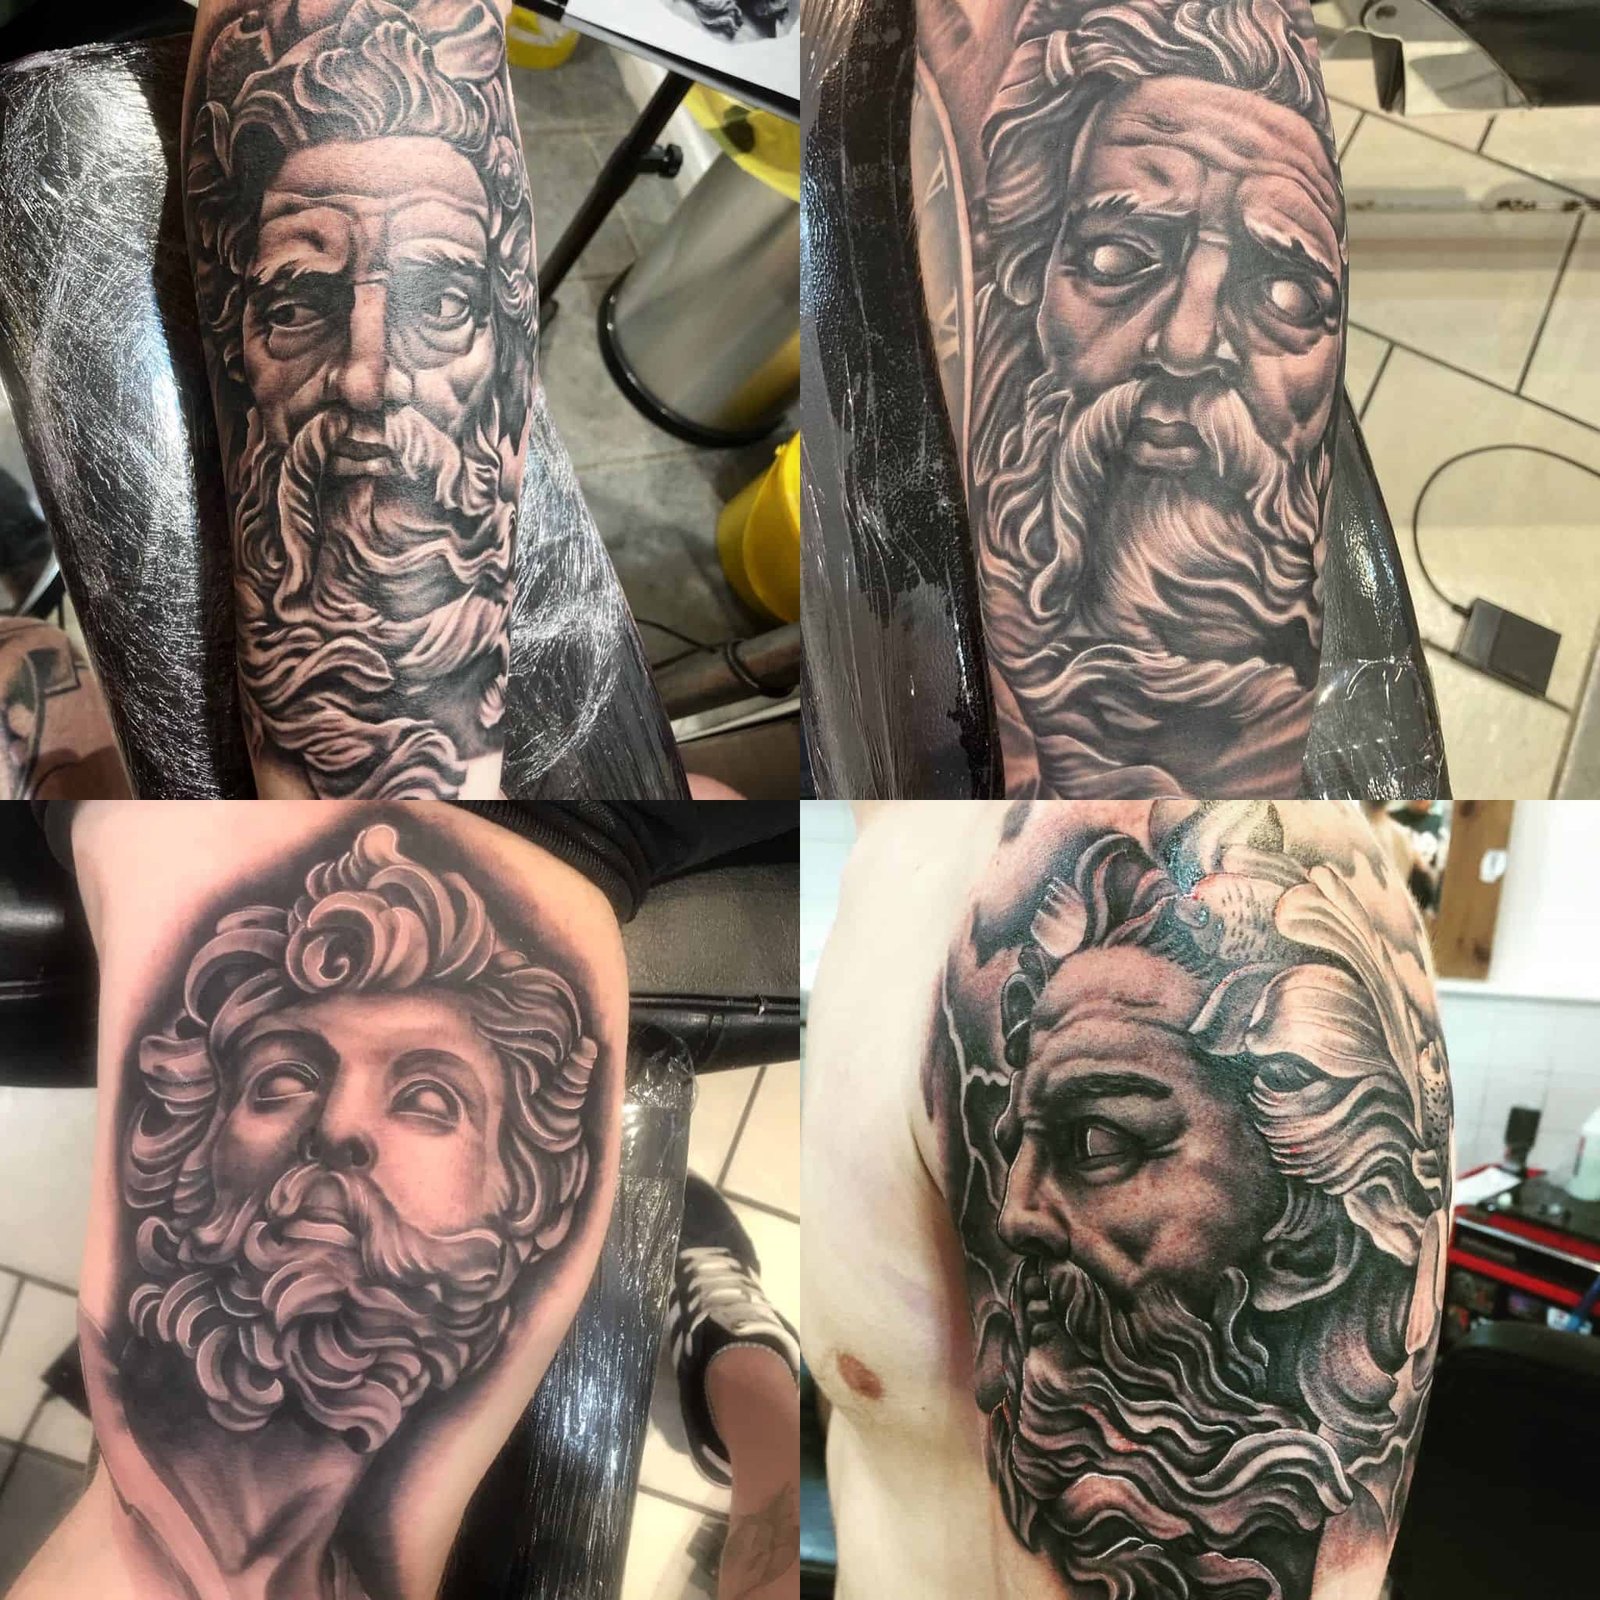 This Summer Has Been All About The Mythology Tattoo